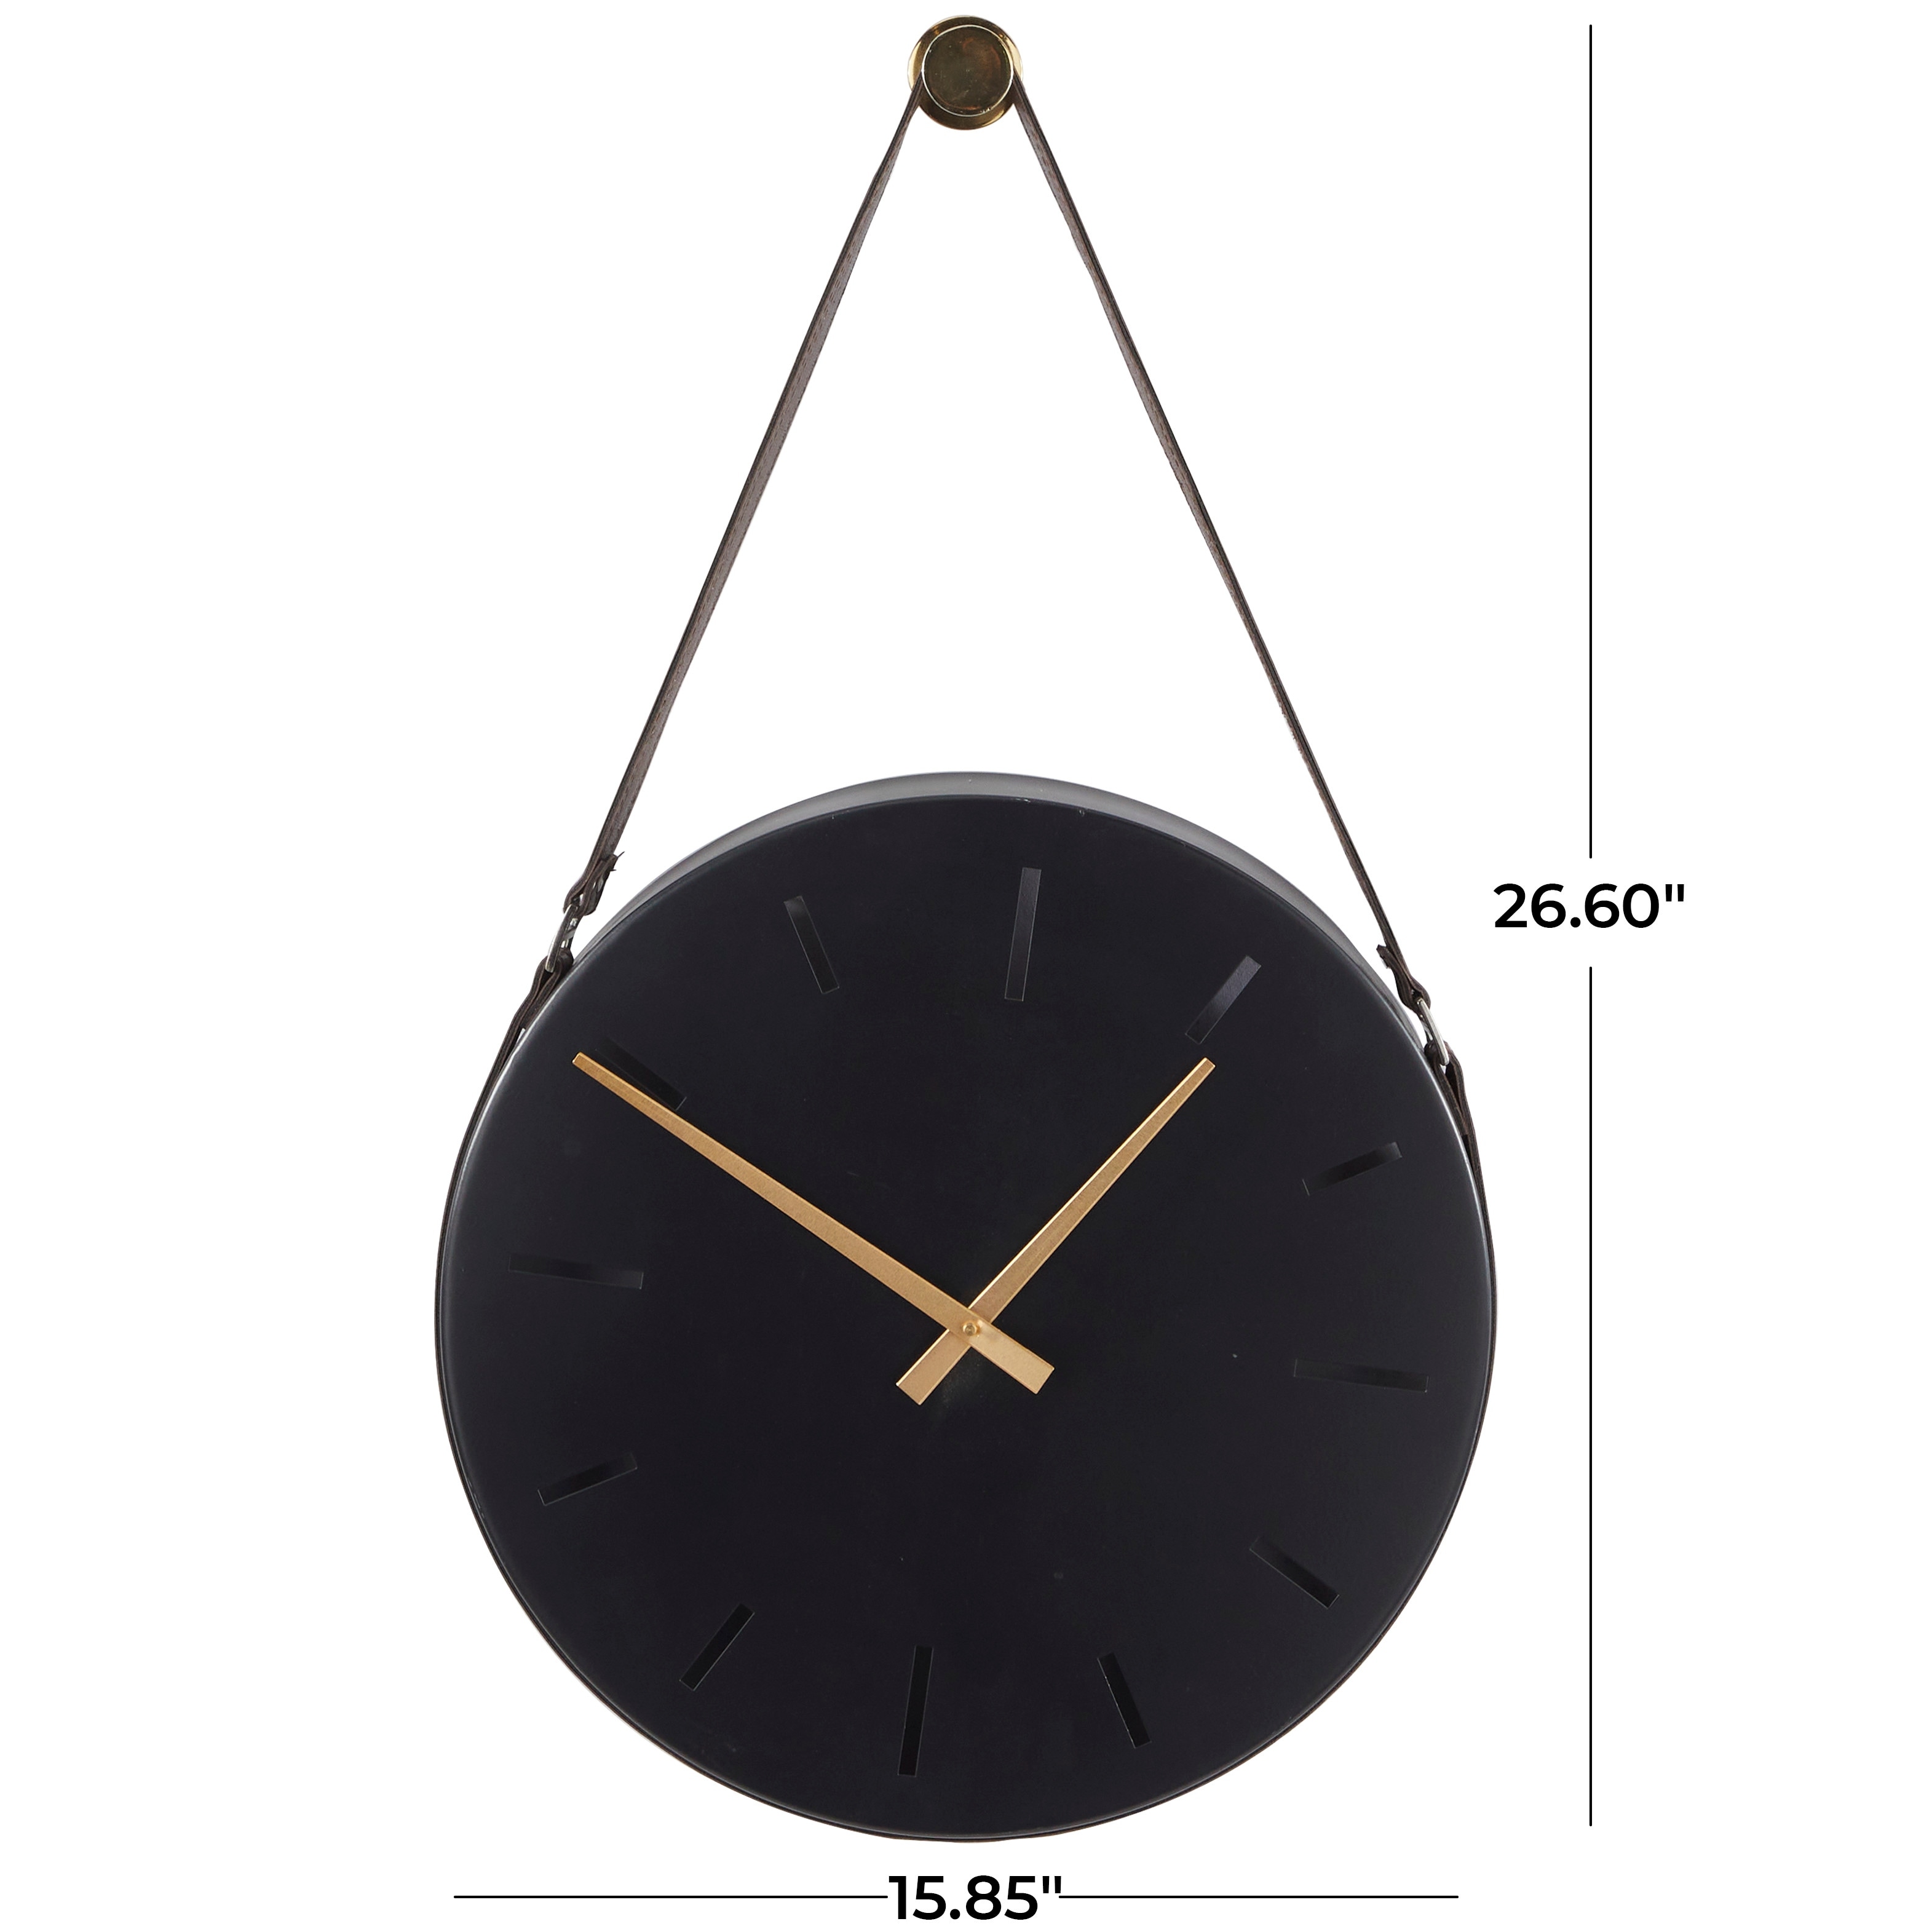 Stainless Steel Wall Clock with Leather Hanging Straps - Bed Bath